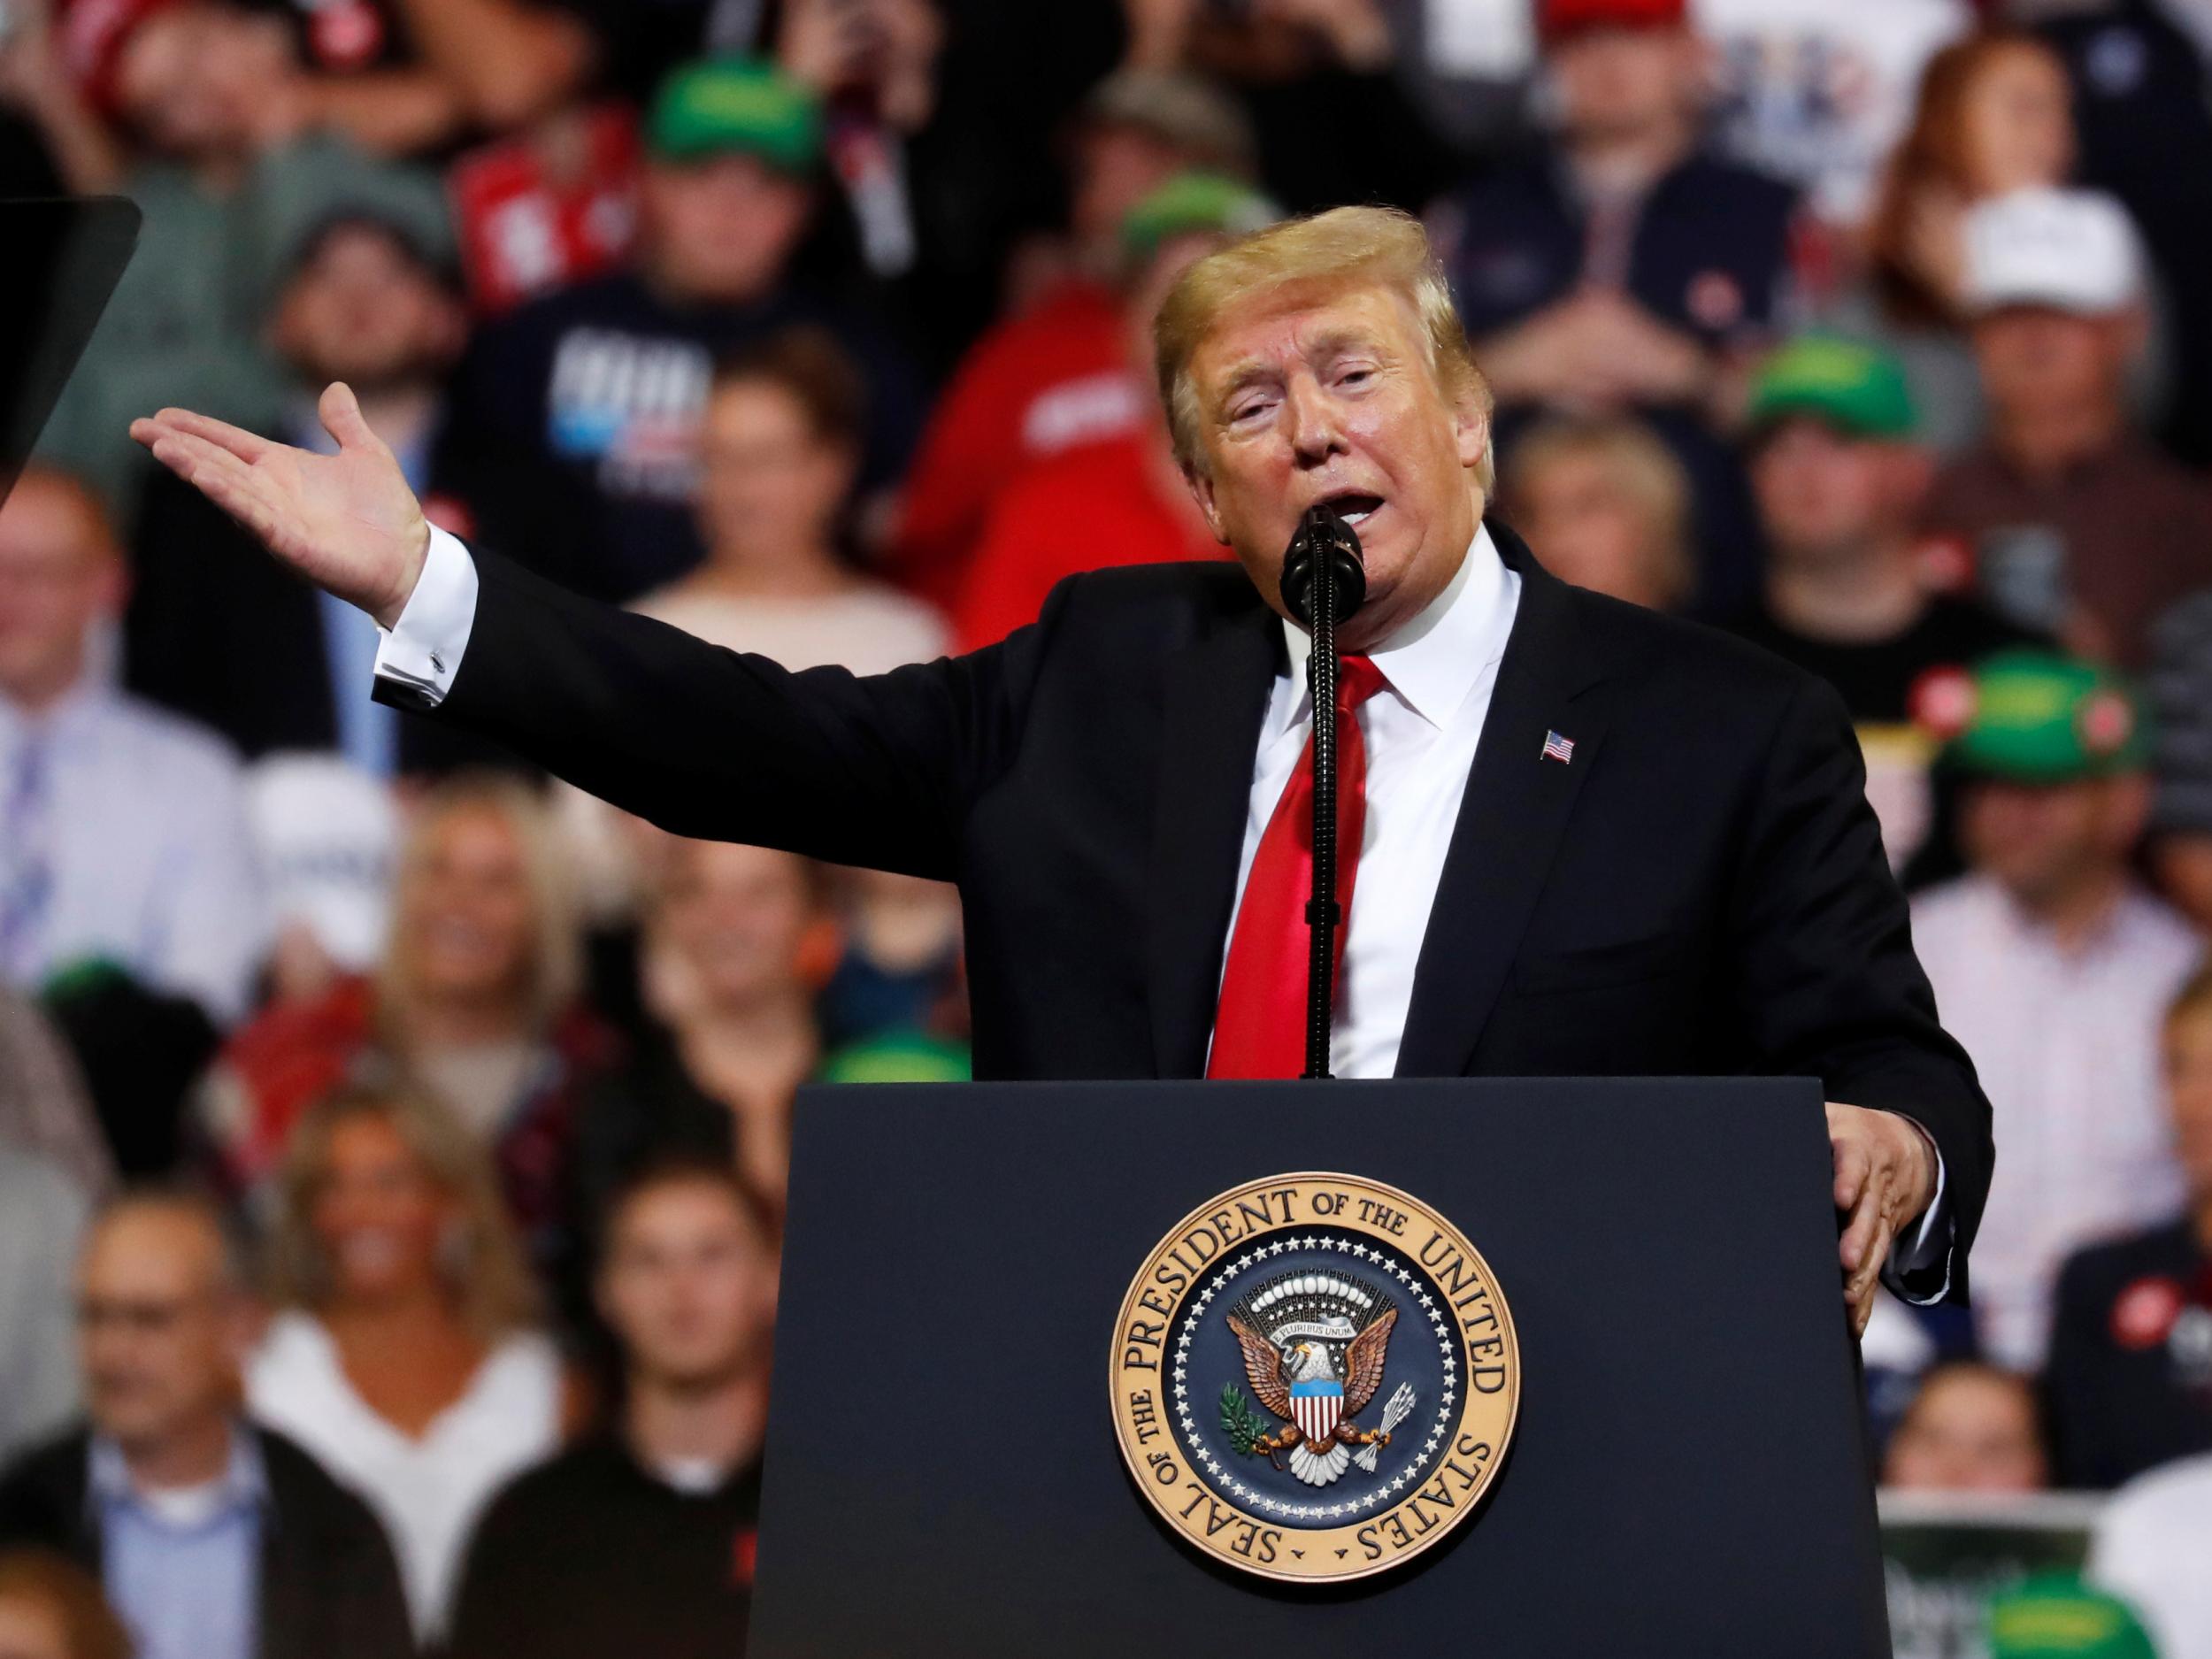 President Trump's Iowa rally is a preview of his campaign blitz ahead of the midterm elections and his own re-election push